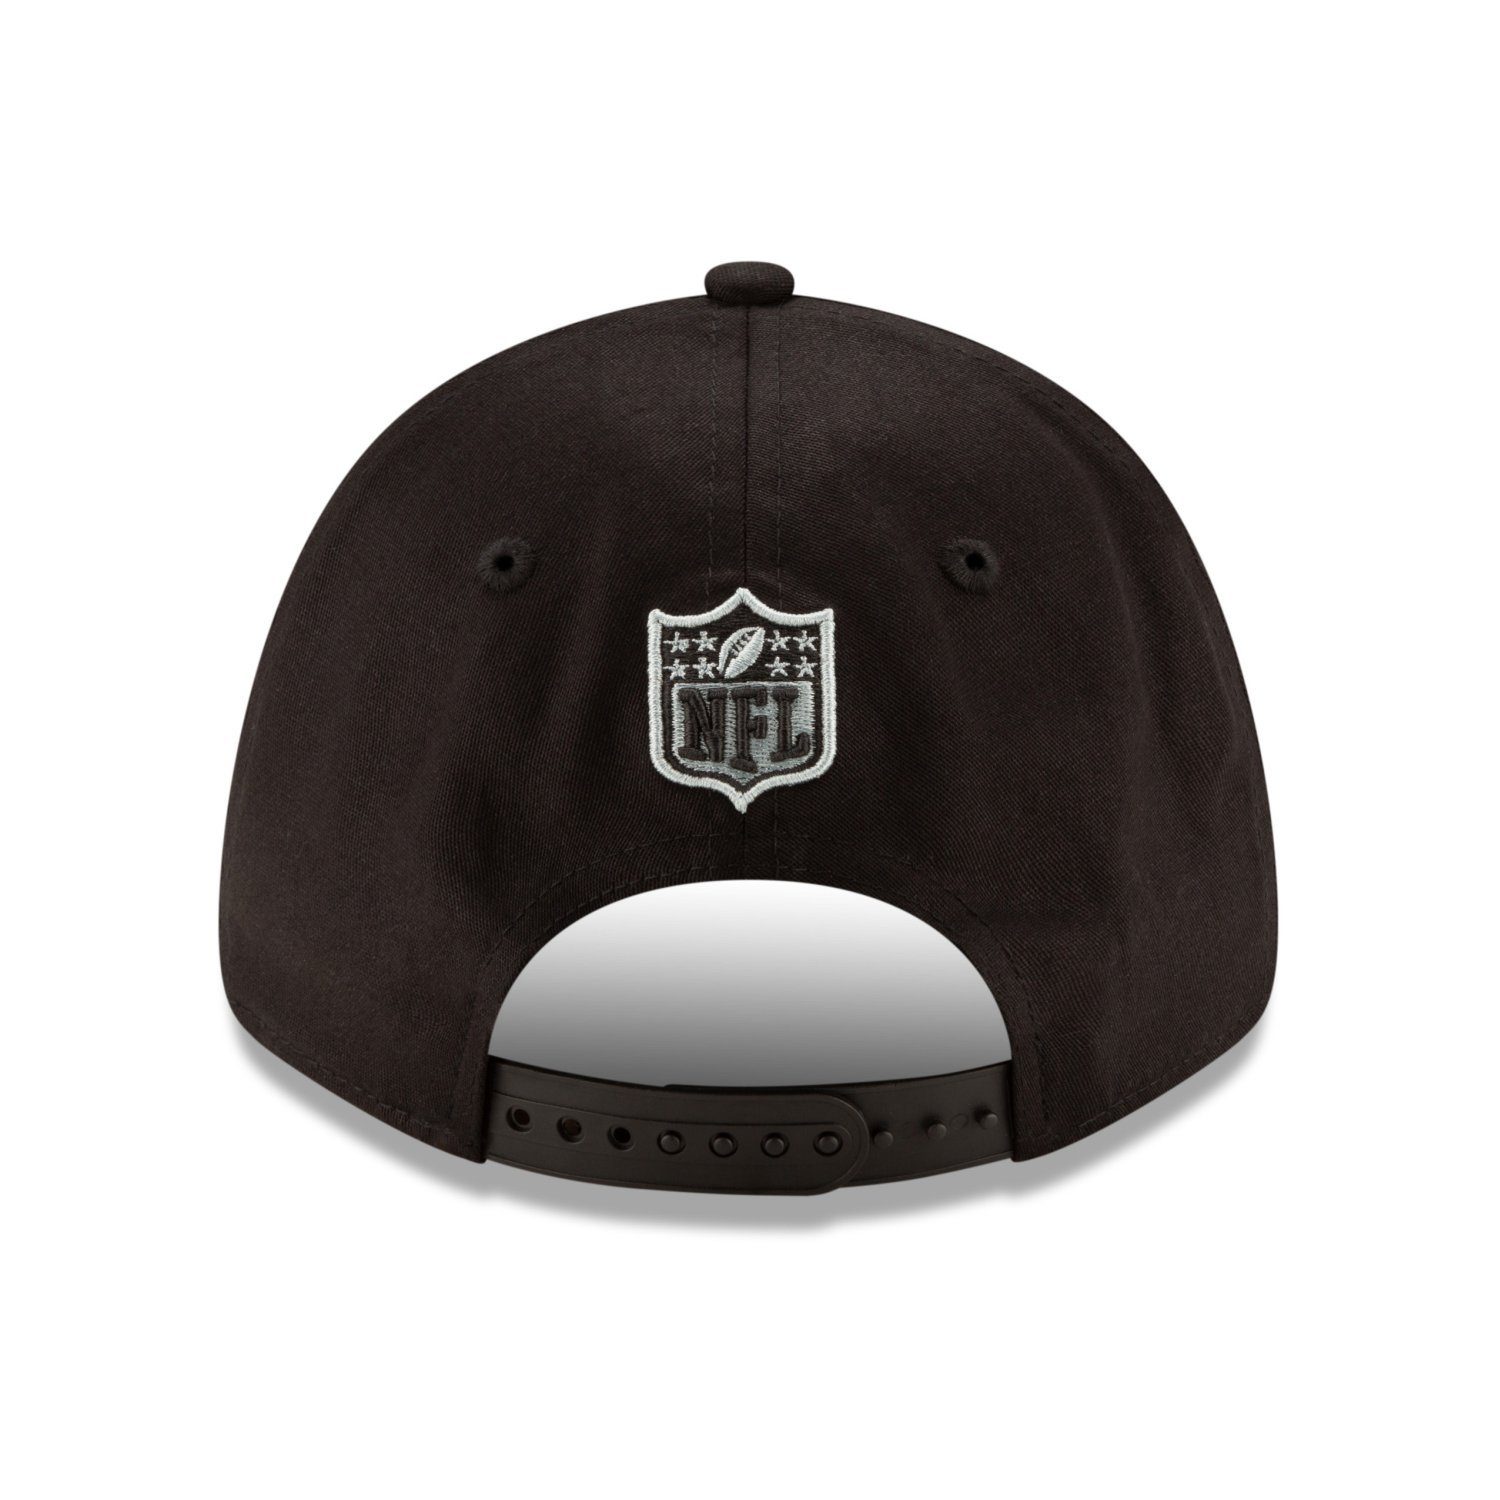 New Era Stretch Fitted Cap 2020 DRAFT Vegas Las Raiders 9FORTY